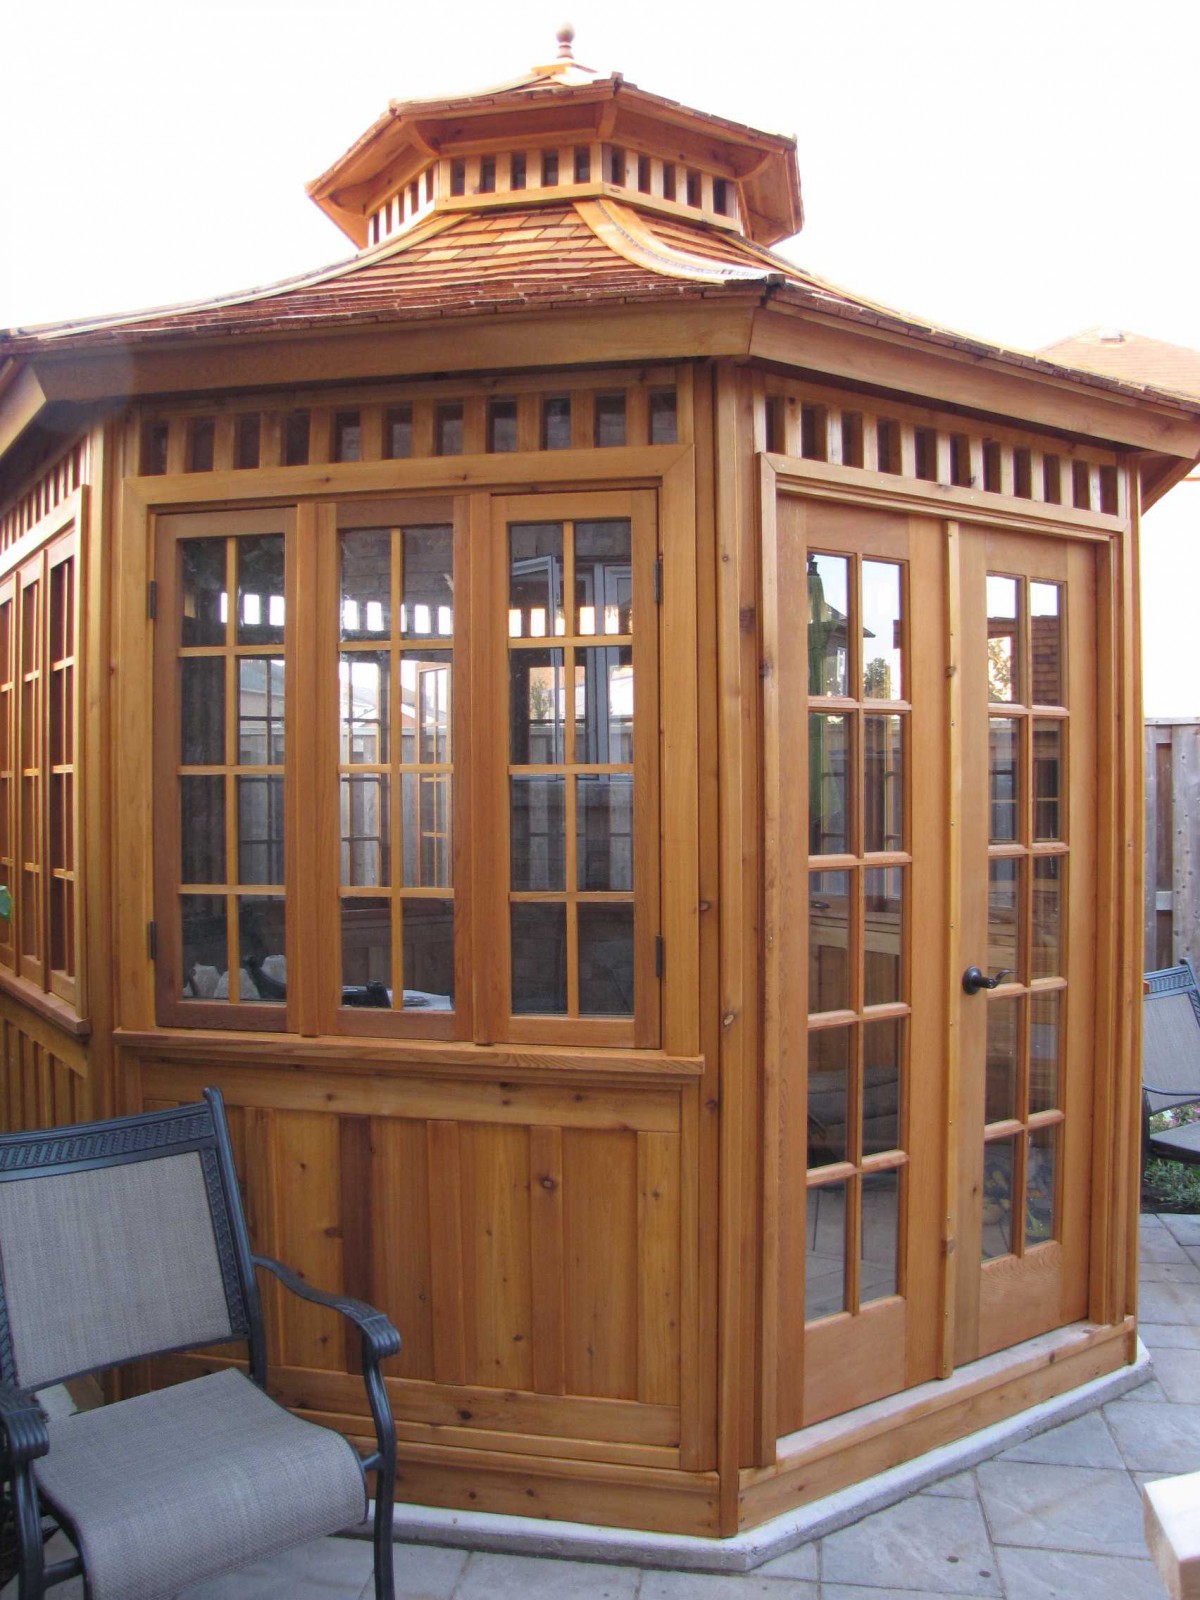 San cristobal Gazebo plan 11' in backyard with stained finish seen from left.ID number 3412-2.